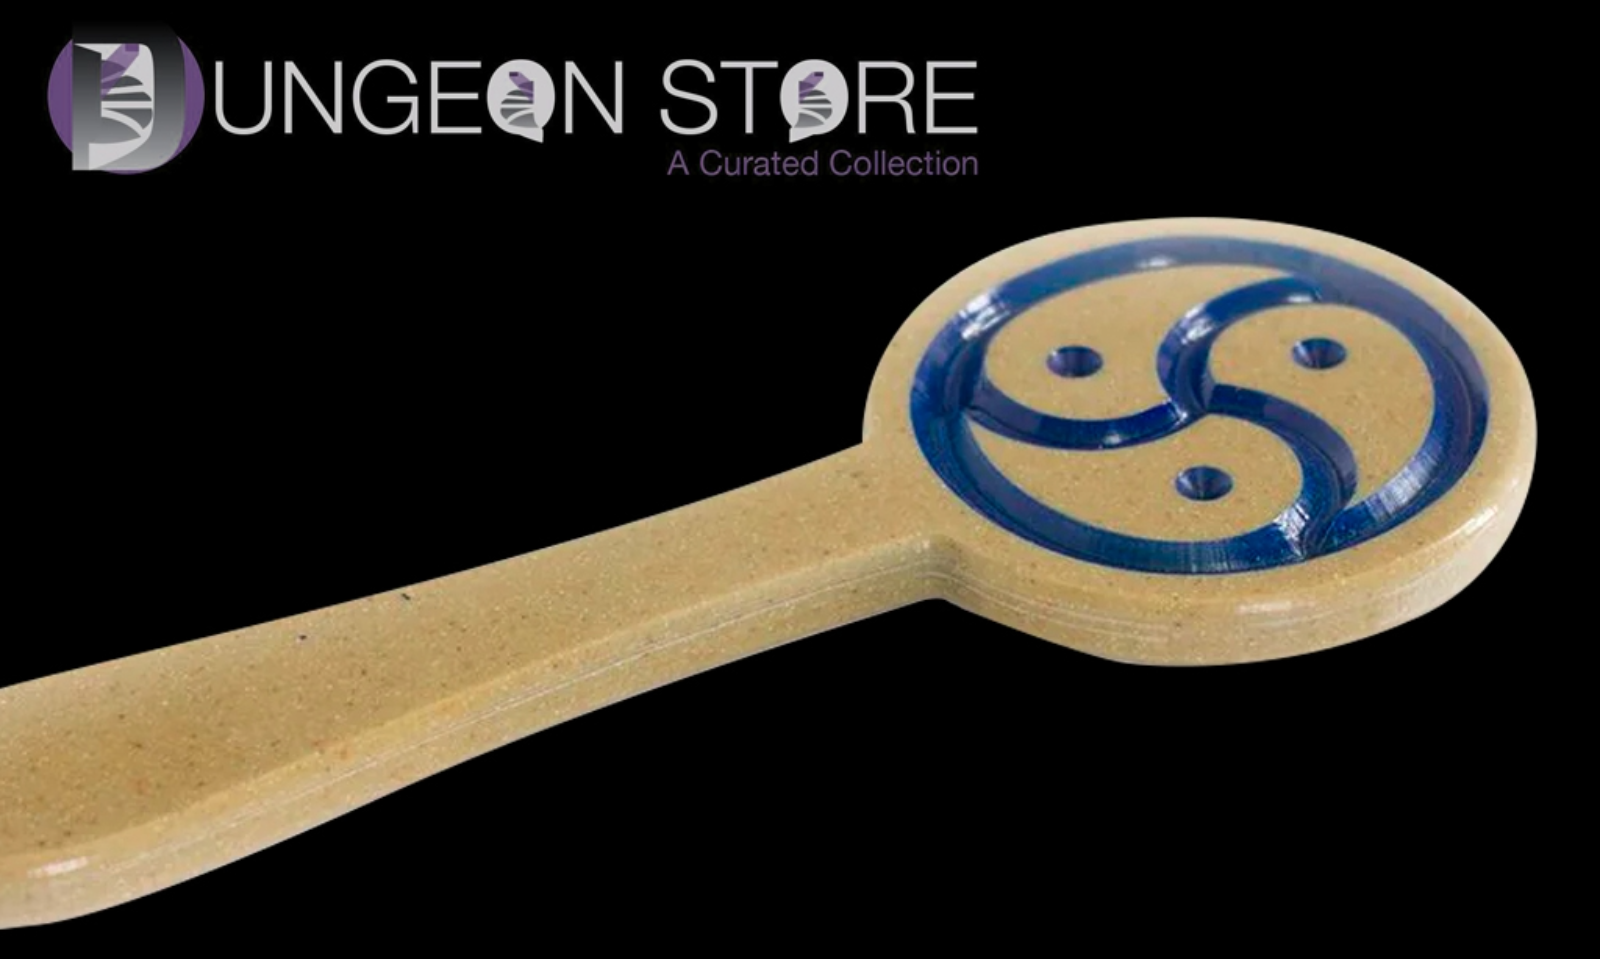 The Dungeon Store Returns to Exxxotica NJ With New Products